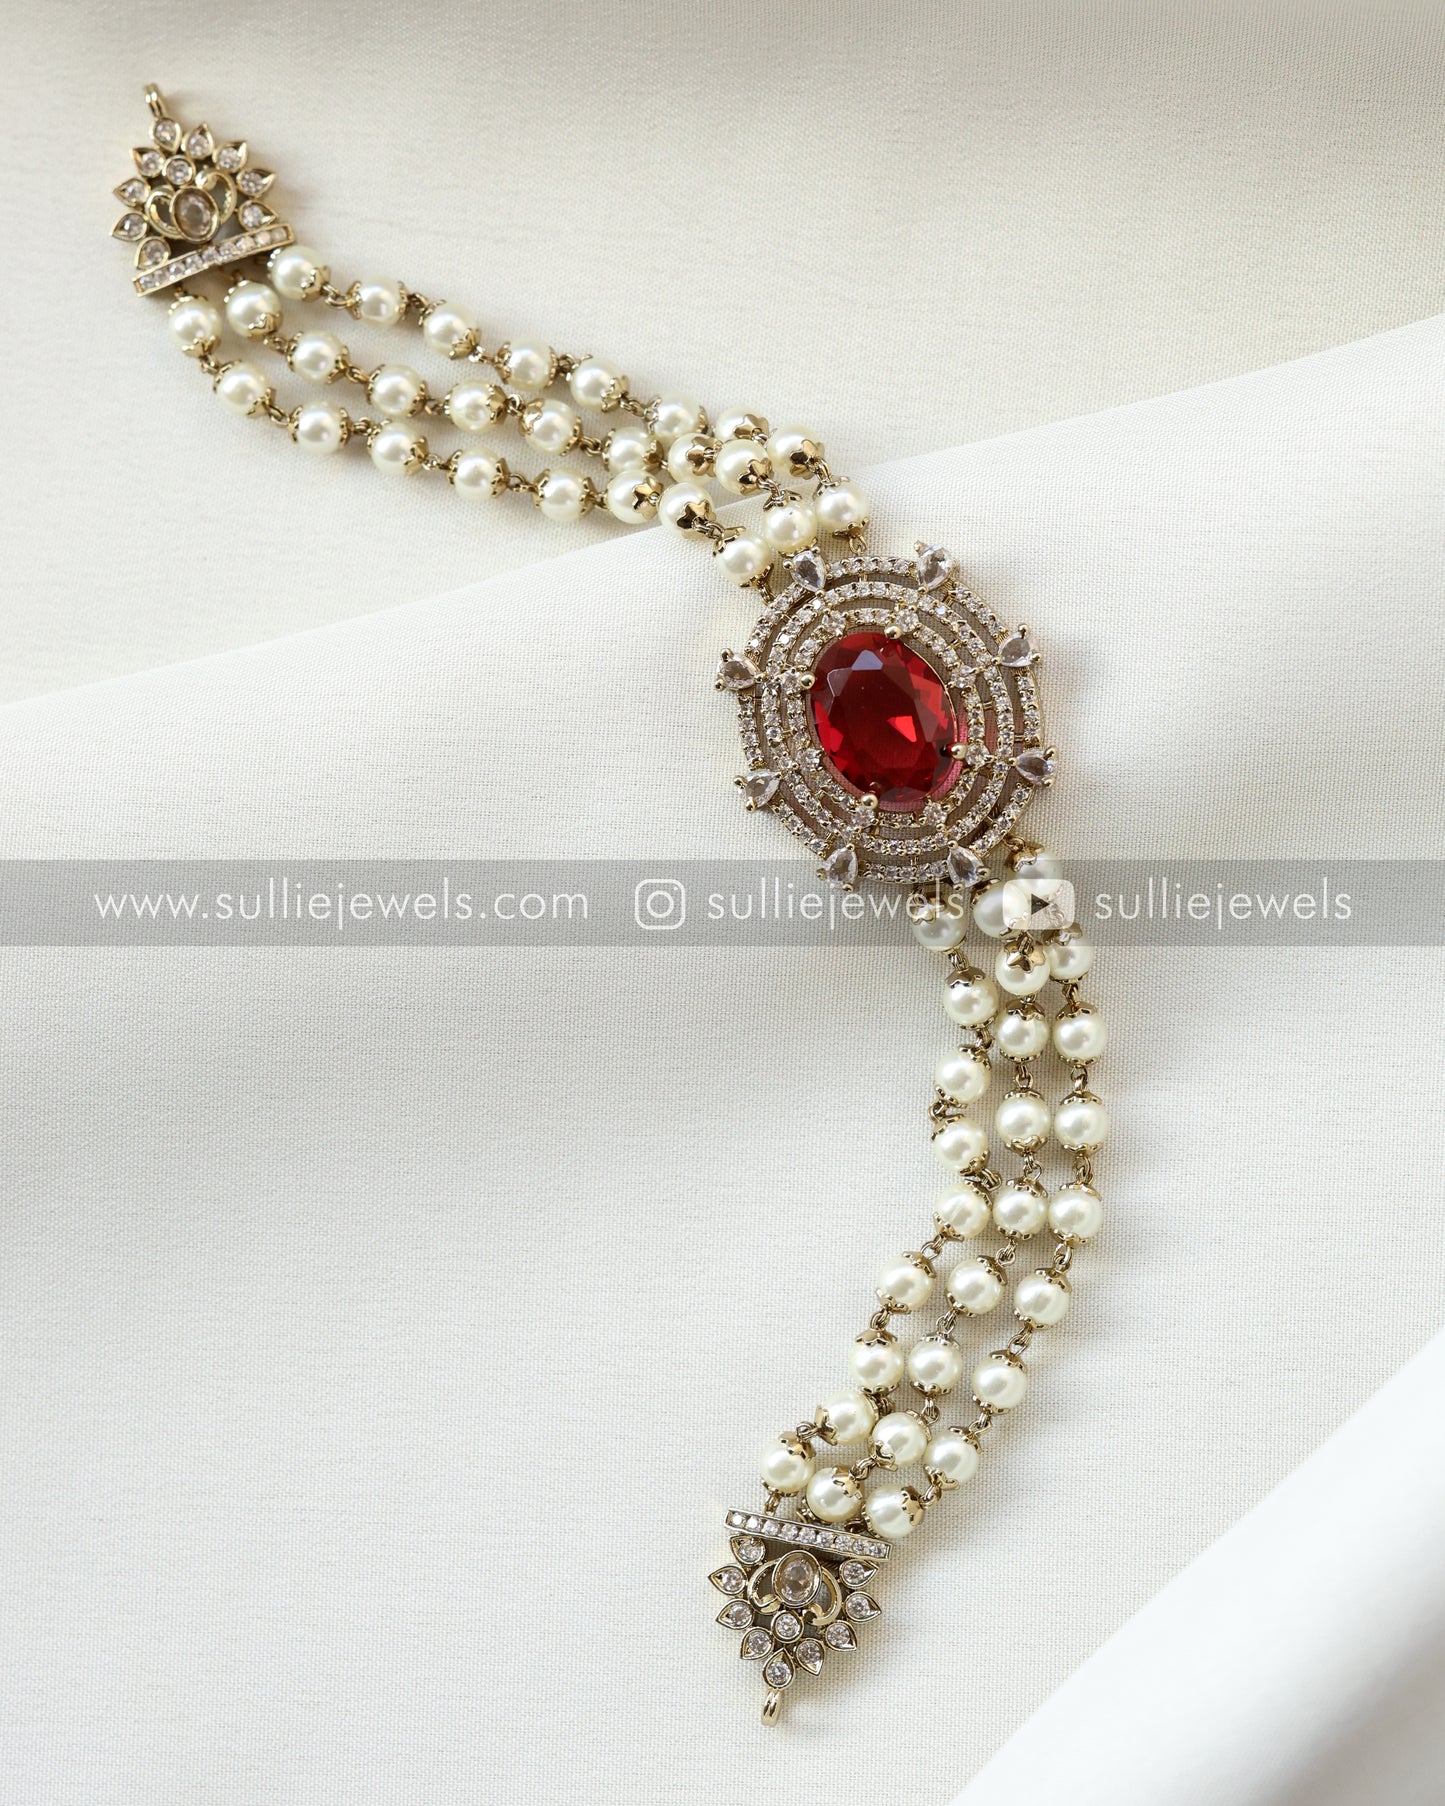 Stone Victorian Pearl Choker with Studs